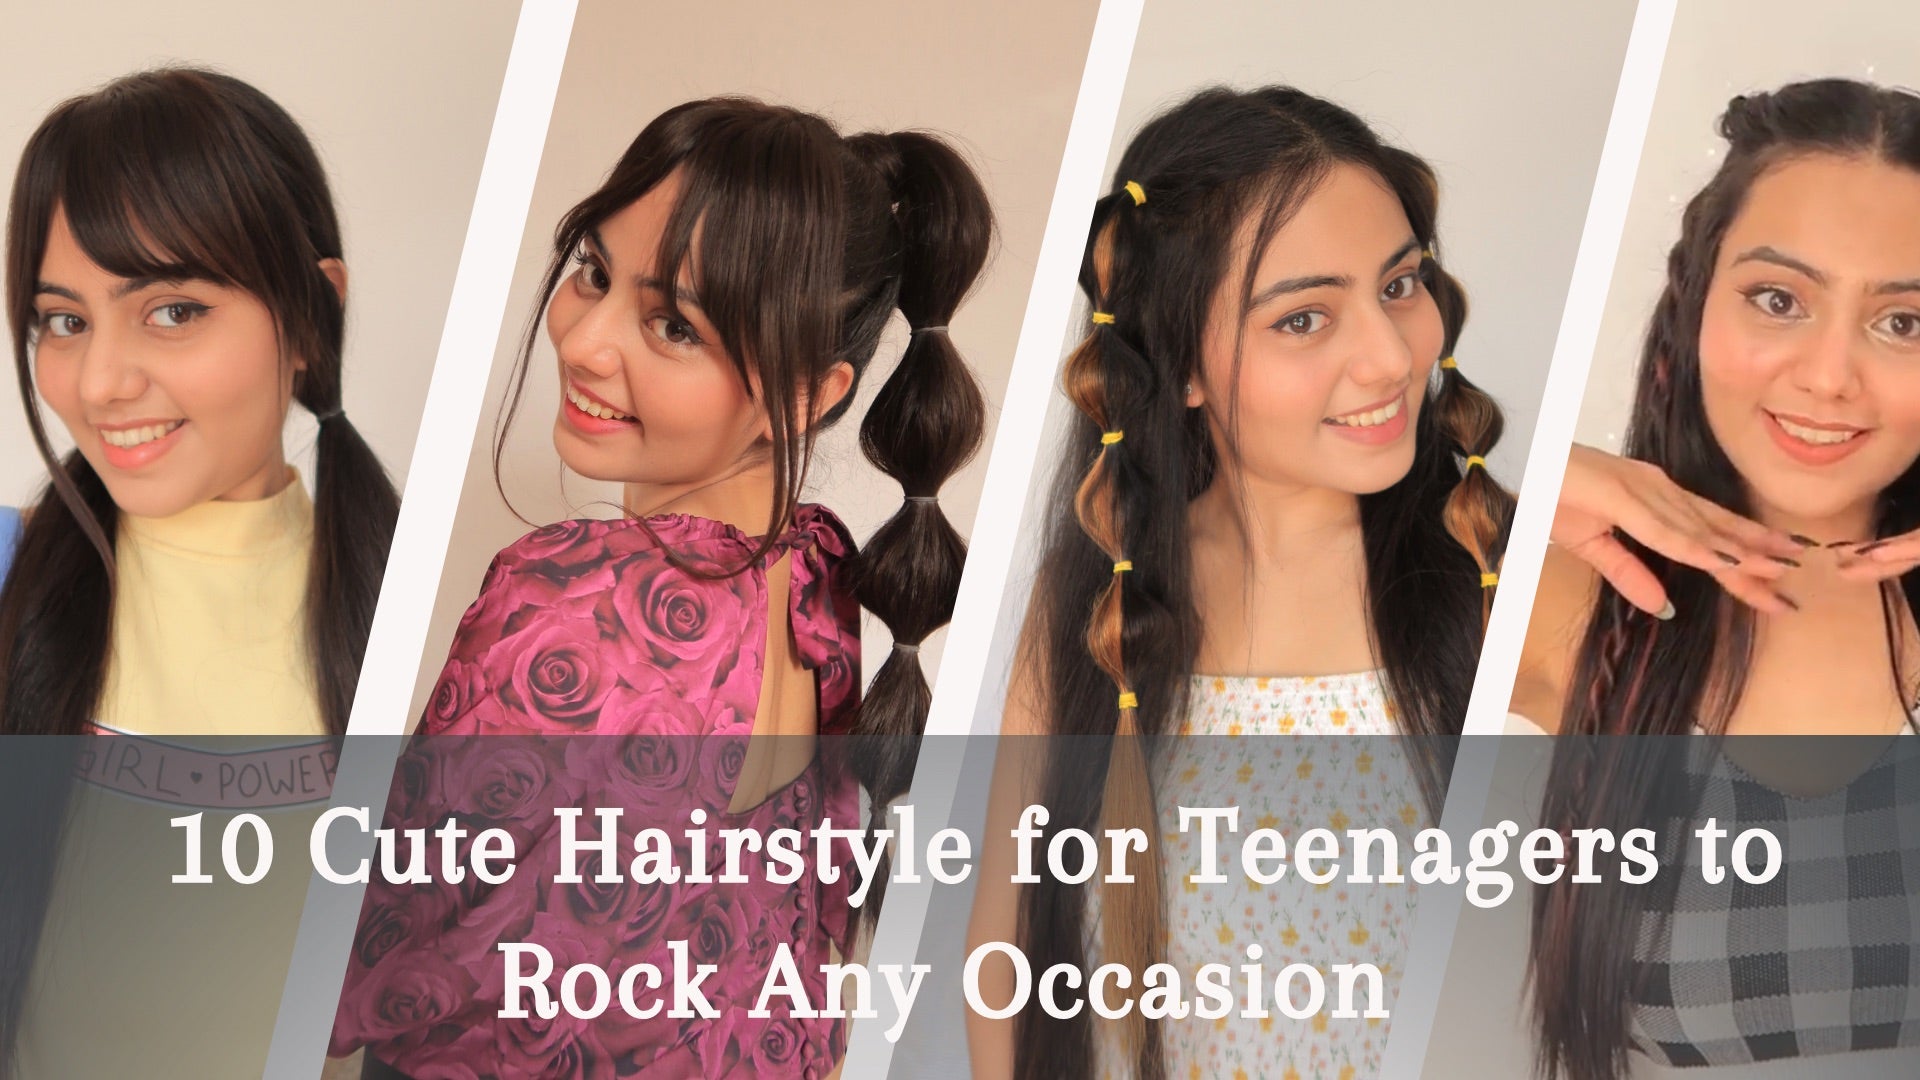 10 Cute Hairstyles for Teenagers to Rock Any Occasion